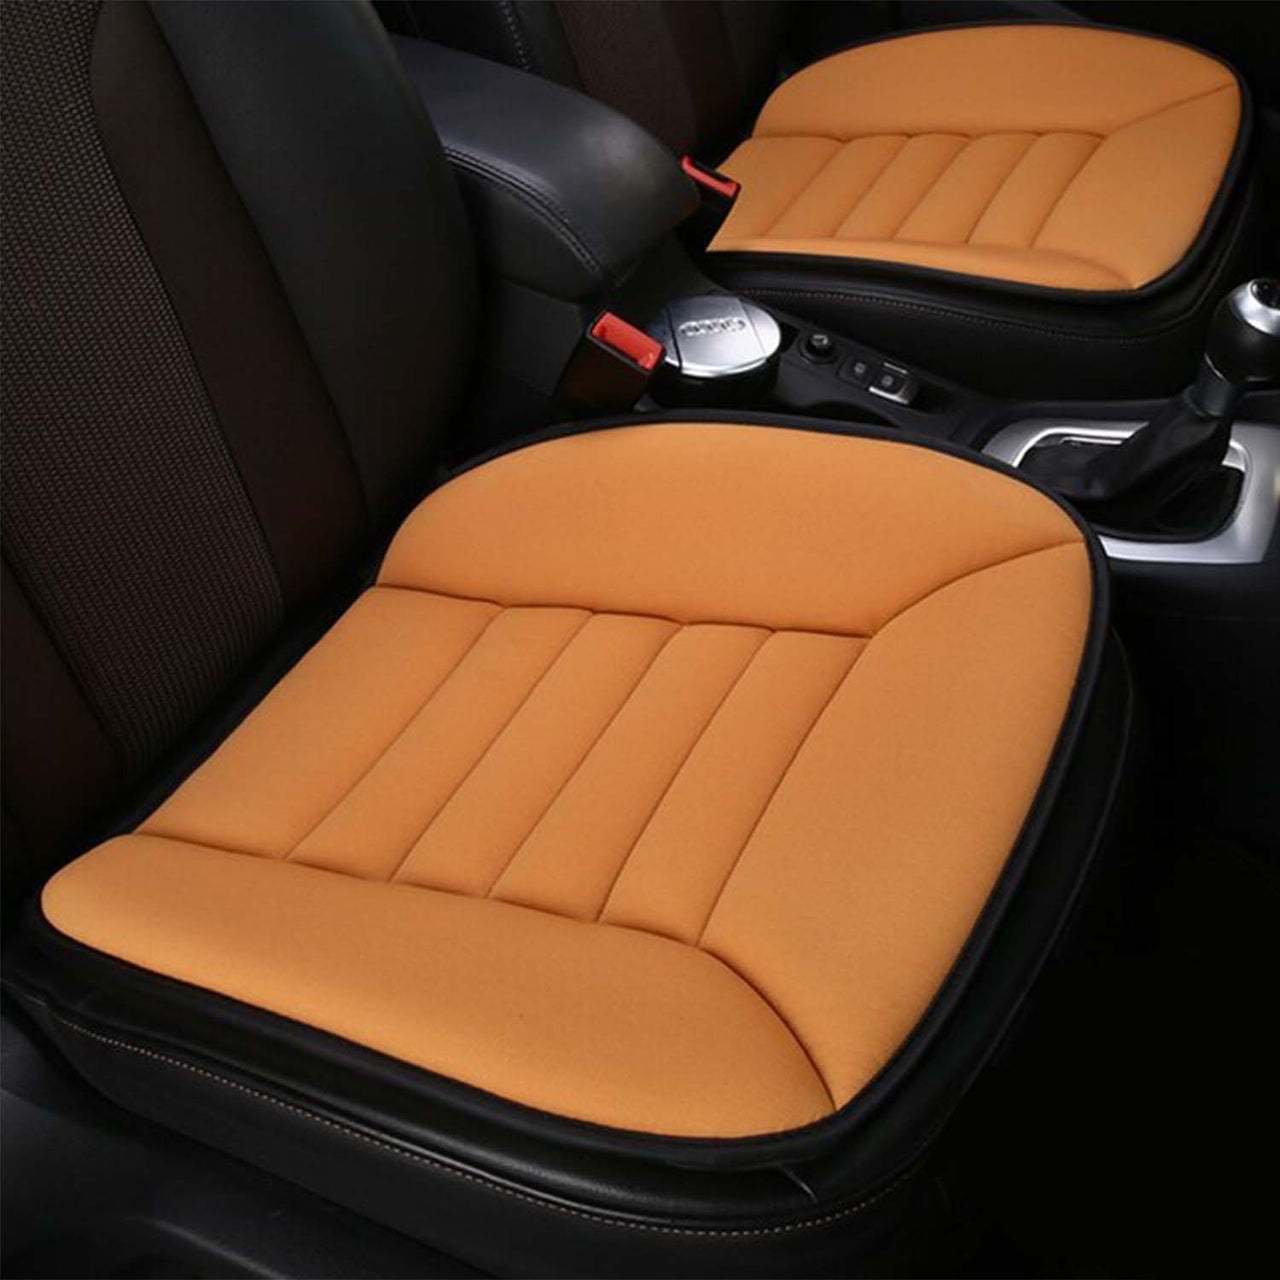 Car Seat Cushion with 1.2inch Comfort Memory Foam, Custom Fit For Your Cars, Seat Cushion for Car and Office Chair TS19989